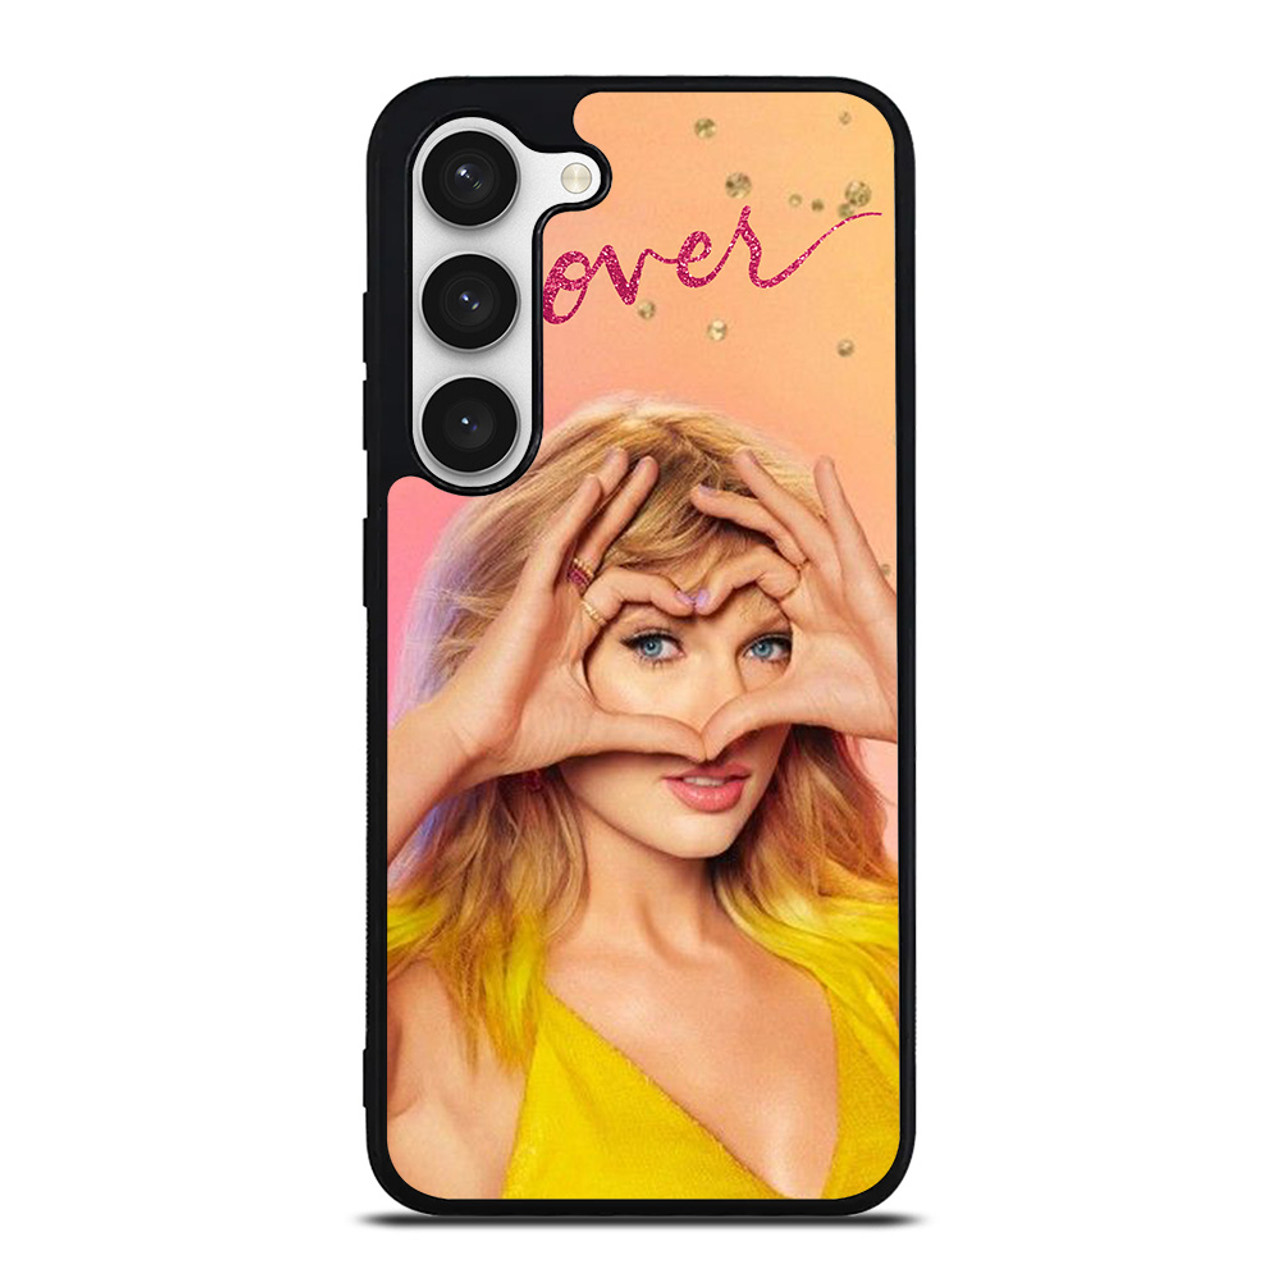 Taylor-Swift Singer Phone Case For Samsung Galaxy S 23 22 21 20 10 9 8 7 6  Plus Ultra 5G Edge lite Transparent Soft Cover - AliExpress